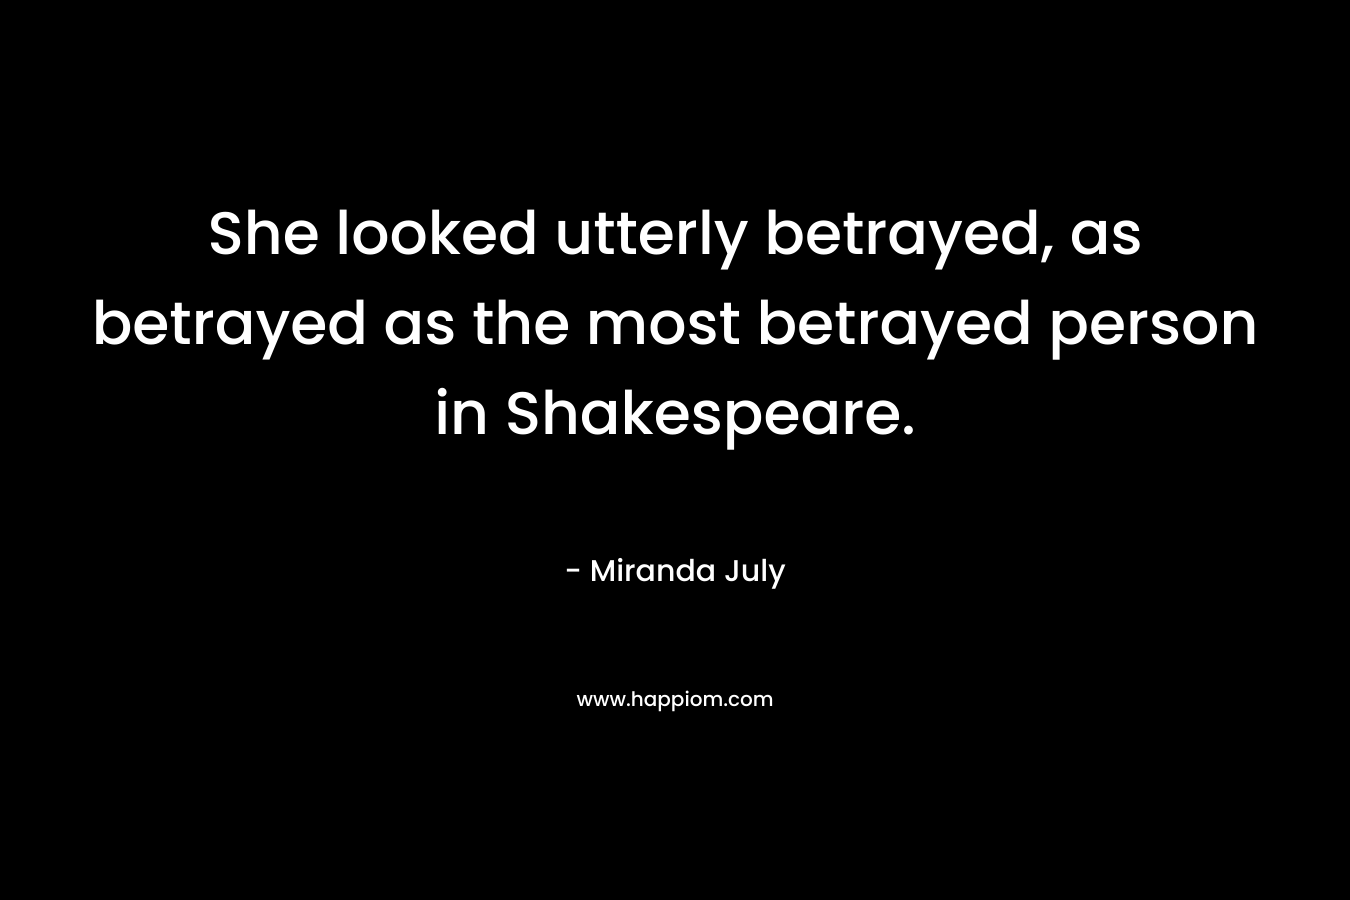 She looked utterly betrayed, as betrayed as the most betrayed person in Shakespeare.